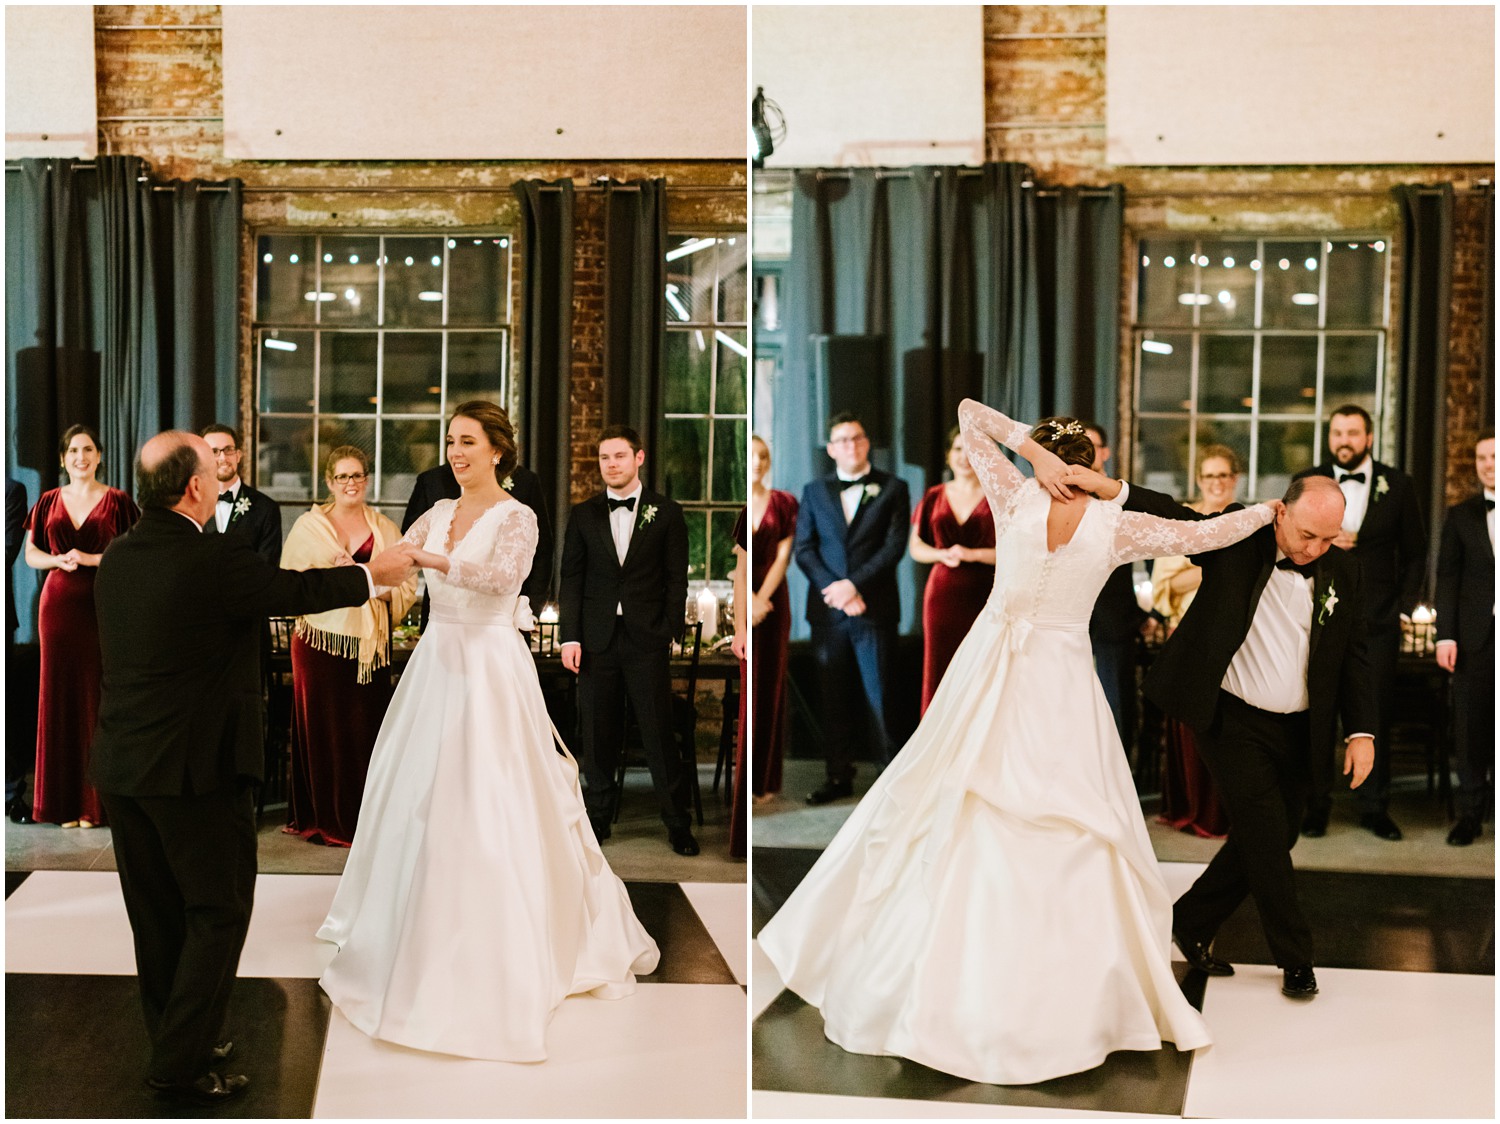 Chelsea Renay Photography photographs choreographed father-daughter dance at NC wedding